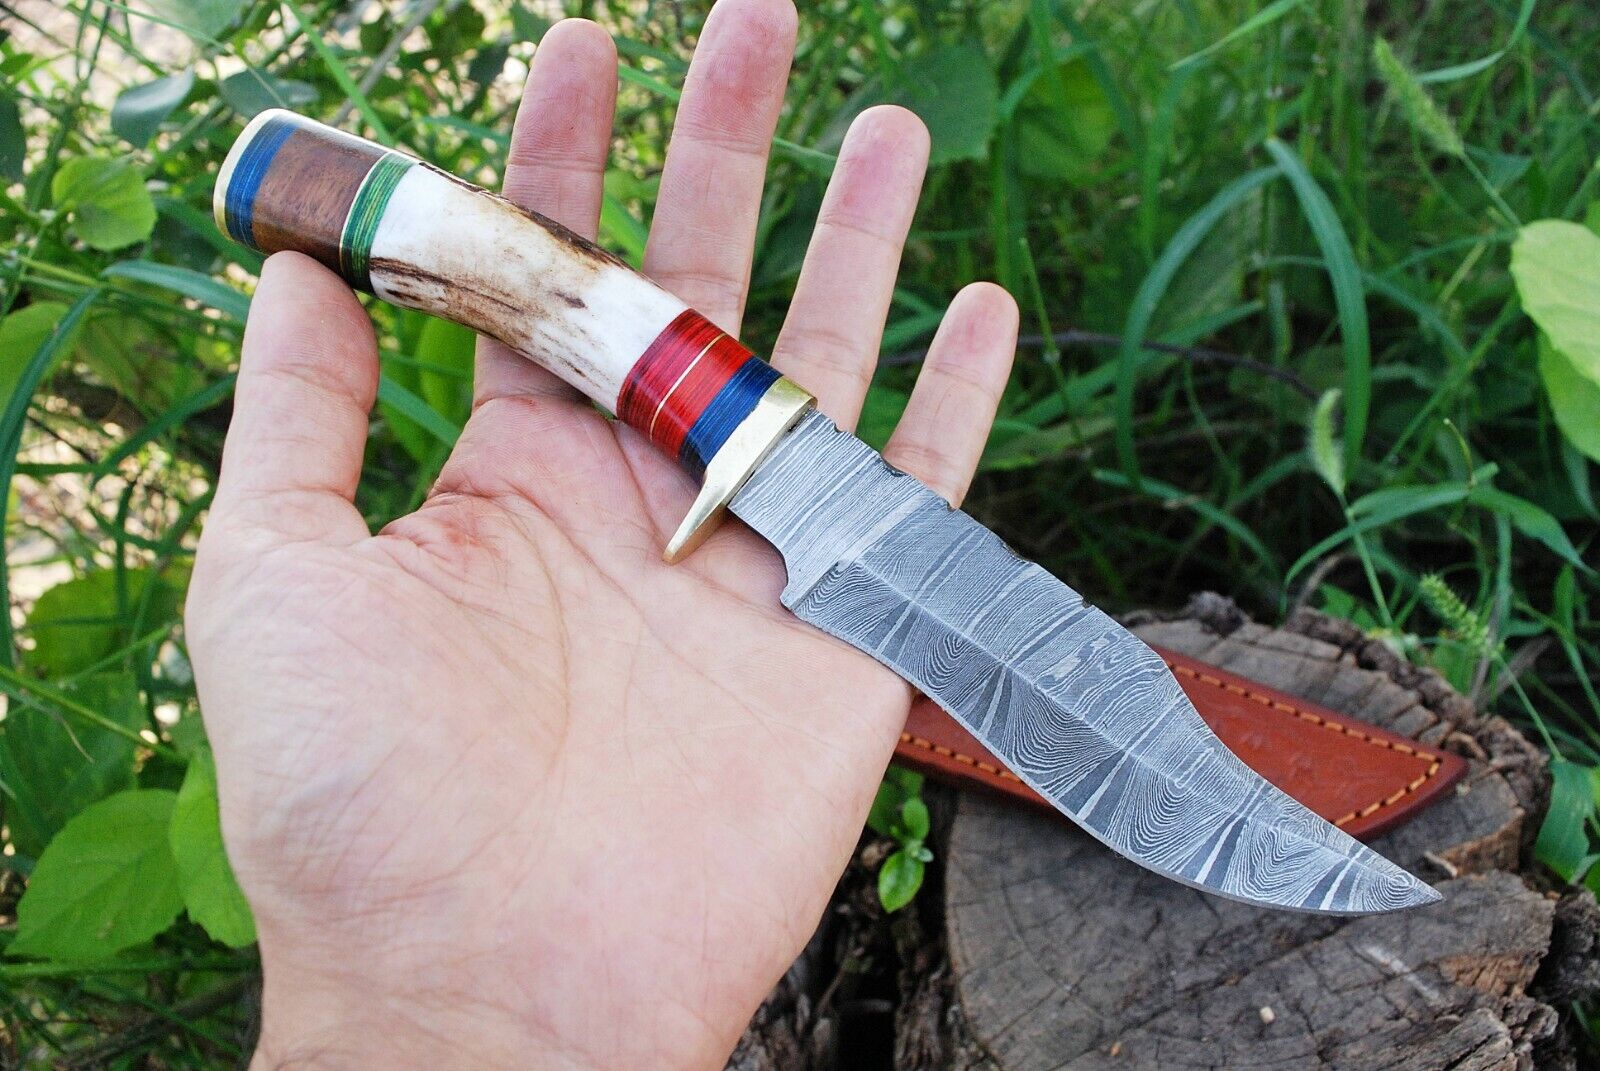 DAMASCUS SHARP BLADE HUNTING TRACKER CAMPING KNIFE BOWIE ELK STAG SHEATH